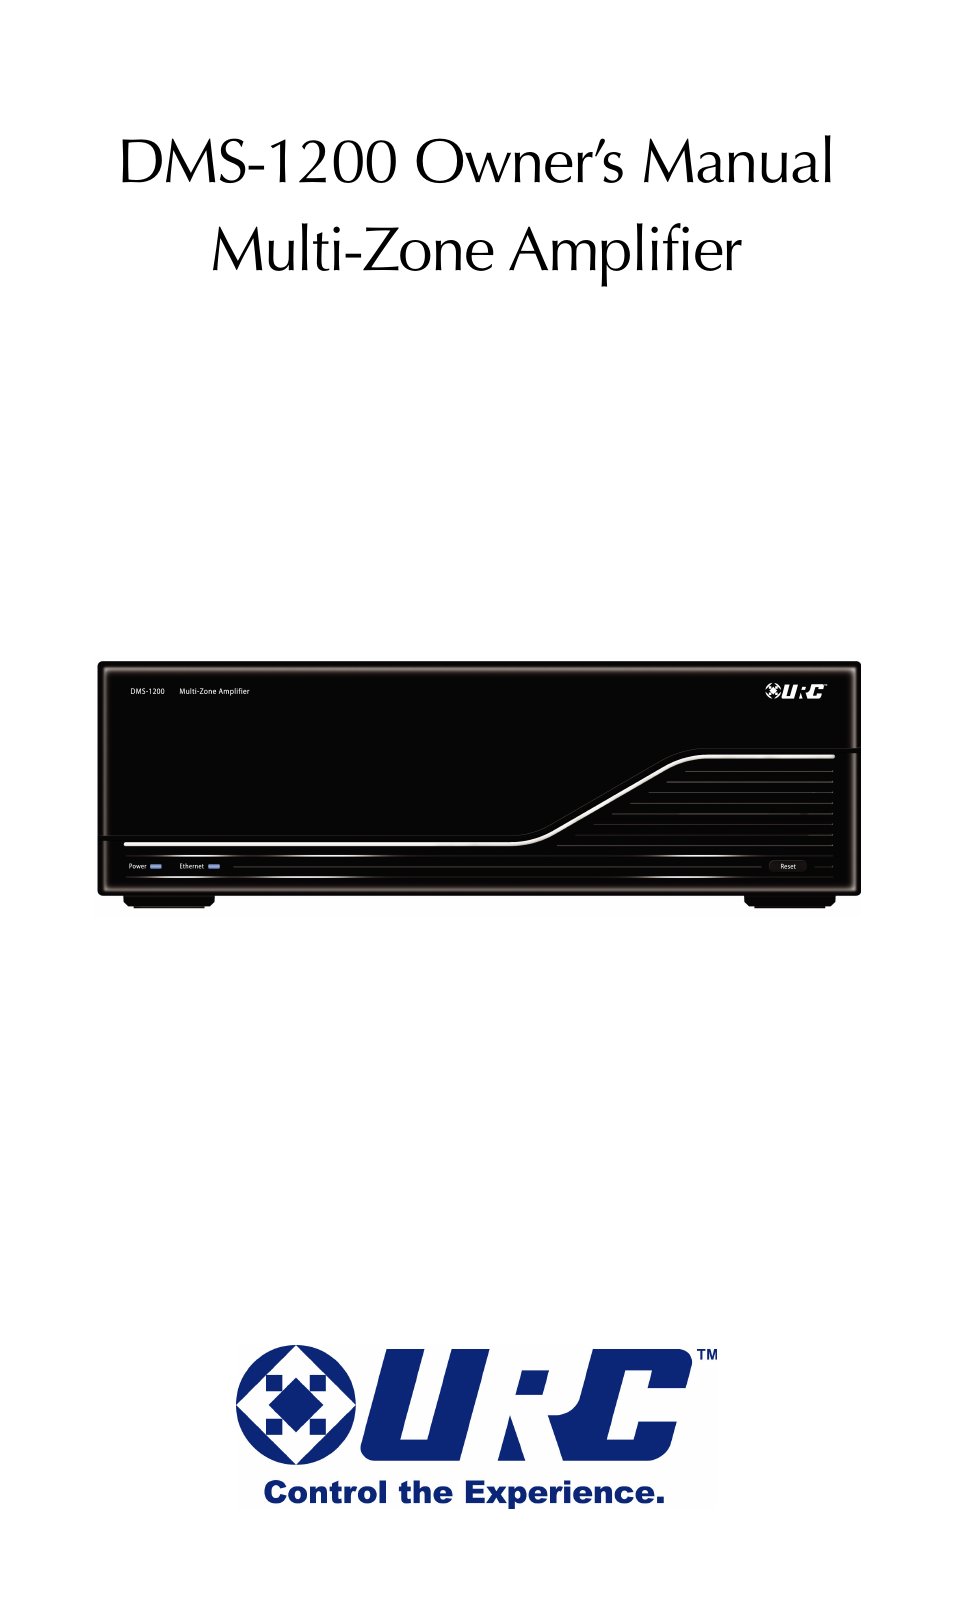 Staub Electronics DMS-1200 URC - MULTI ZONE NETWORK AMPLIFIER User Manual | 18 pages